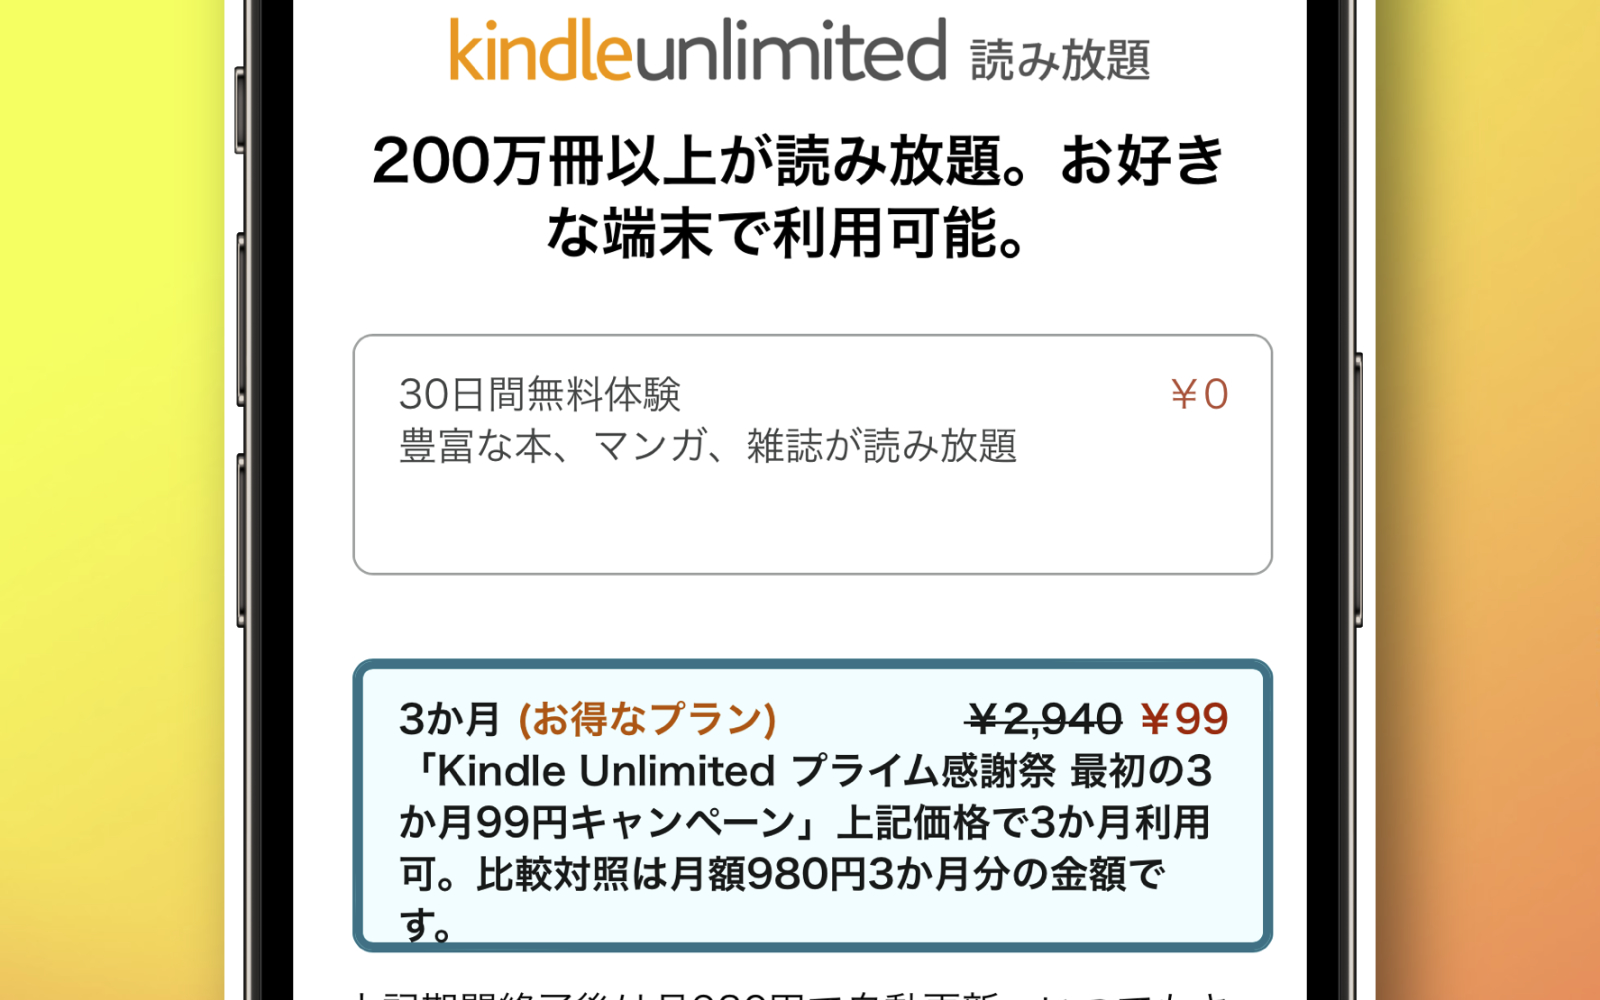 Amazon Kindle Unlimited 3month free plan